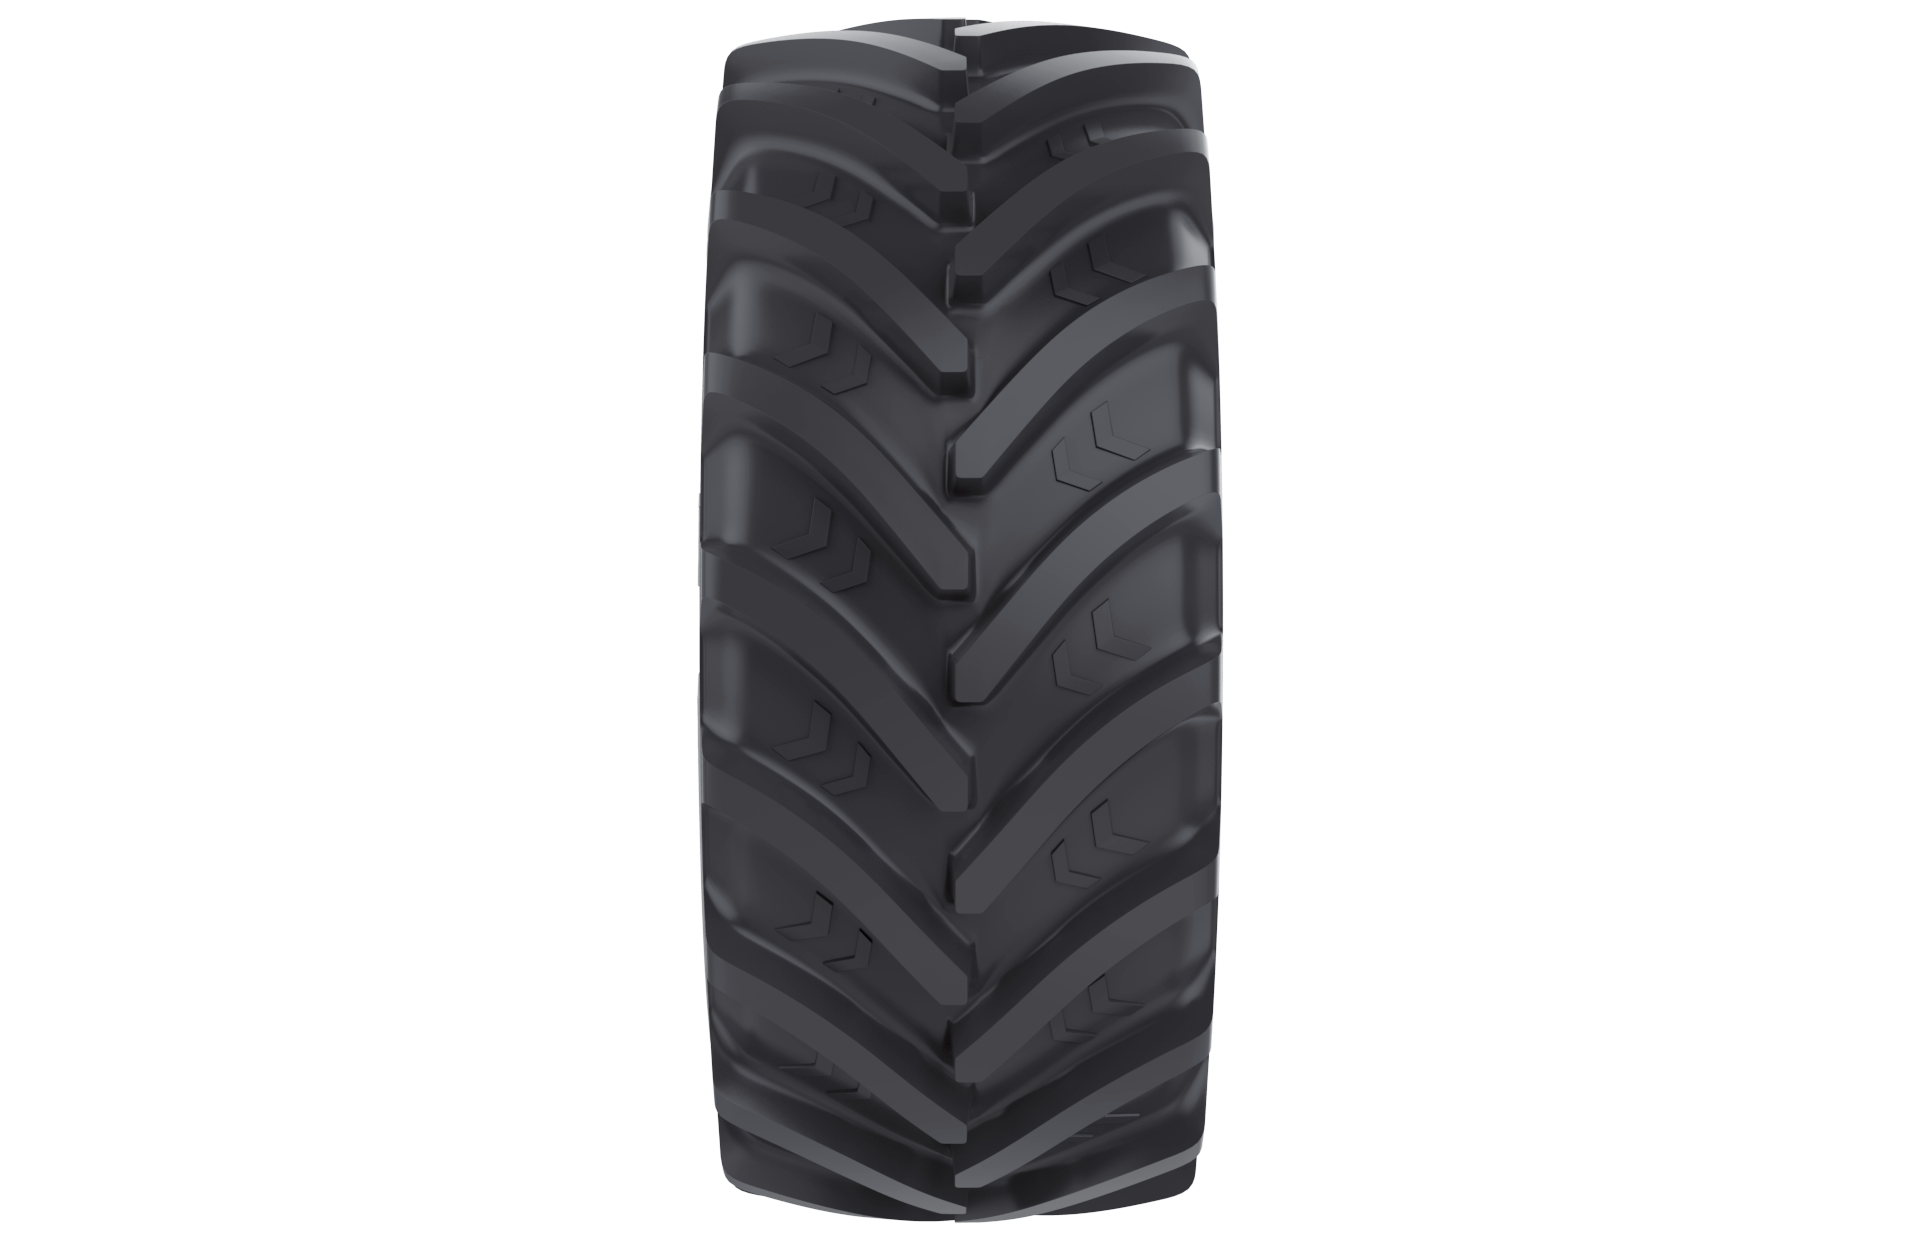 ASCENSO VF 650/65R38 NRO 180D R1-W TL VDR2000 STEEL BELTED